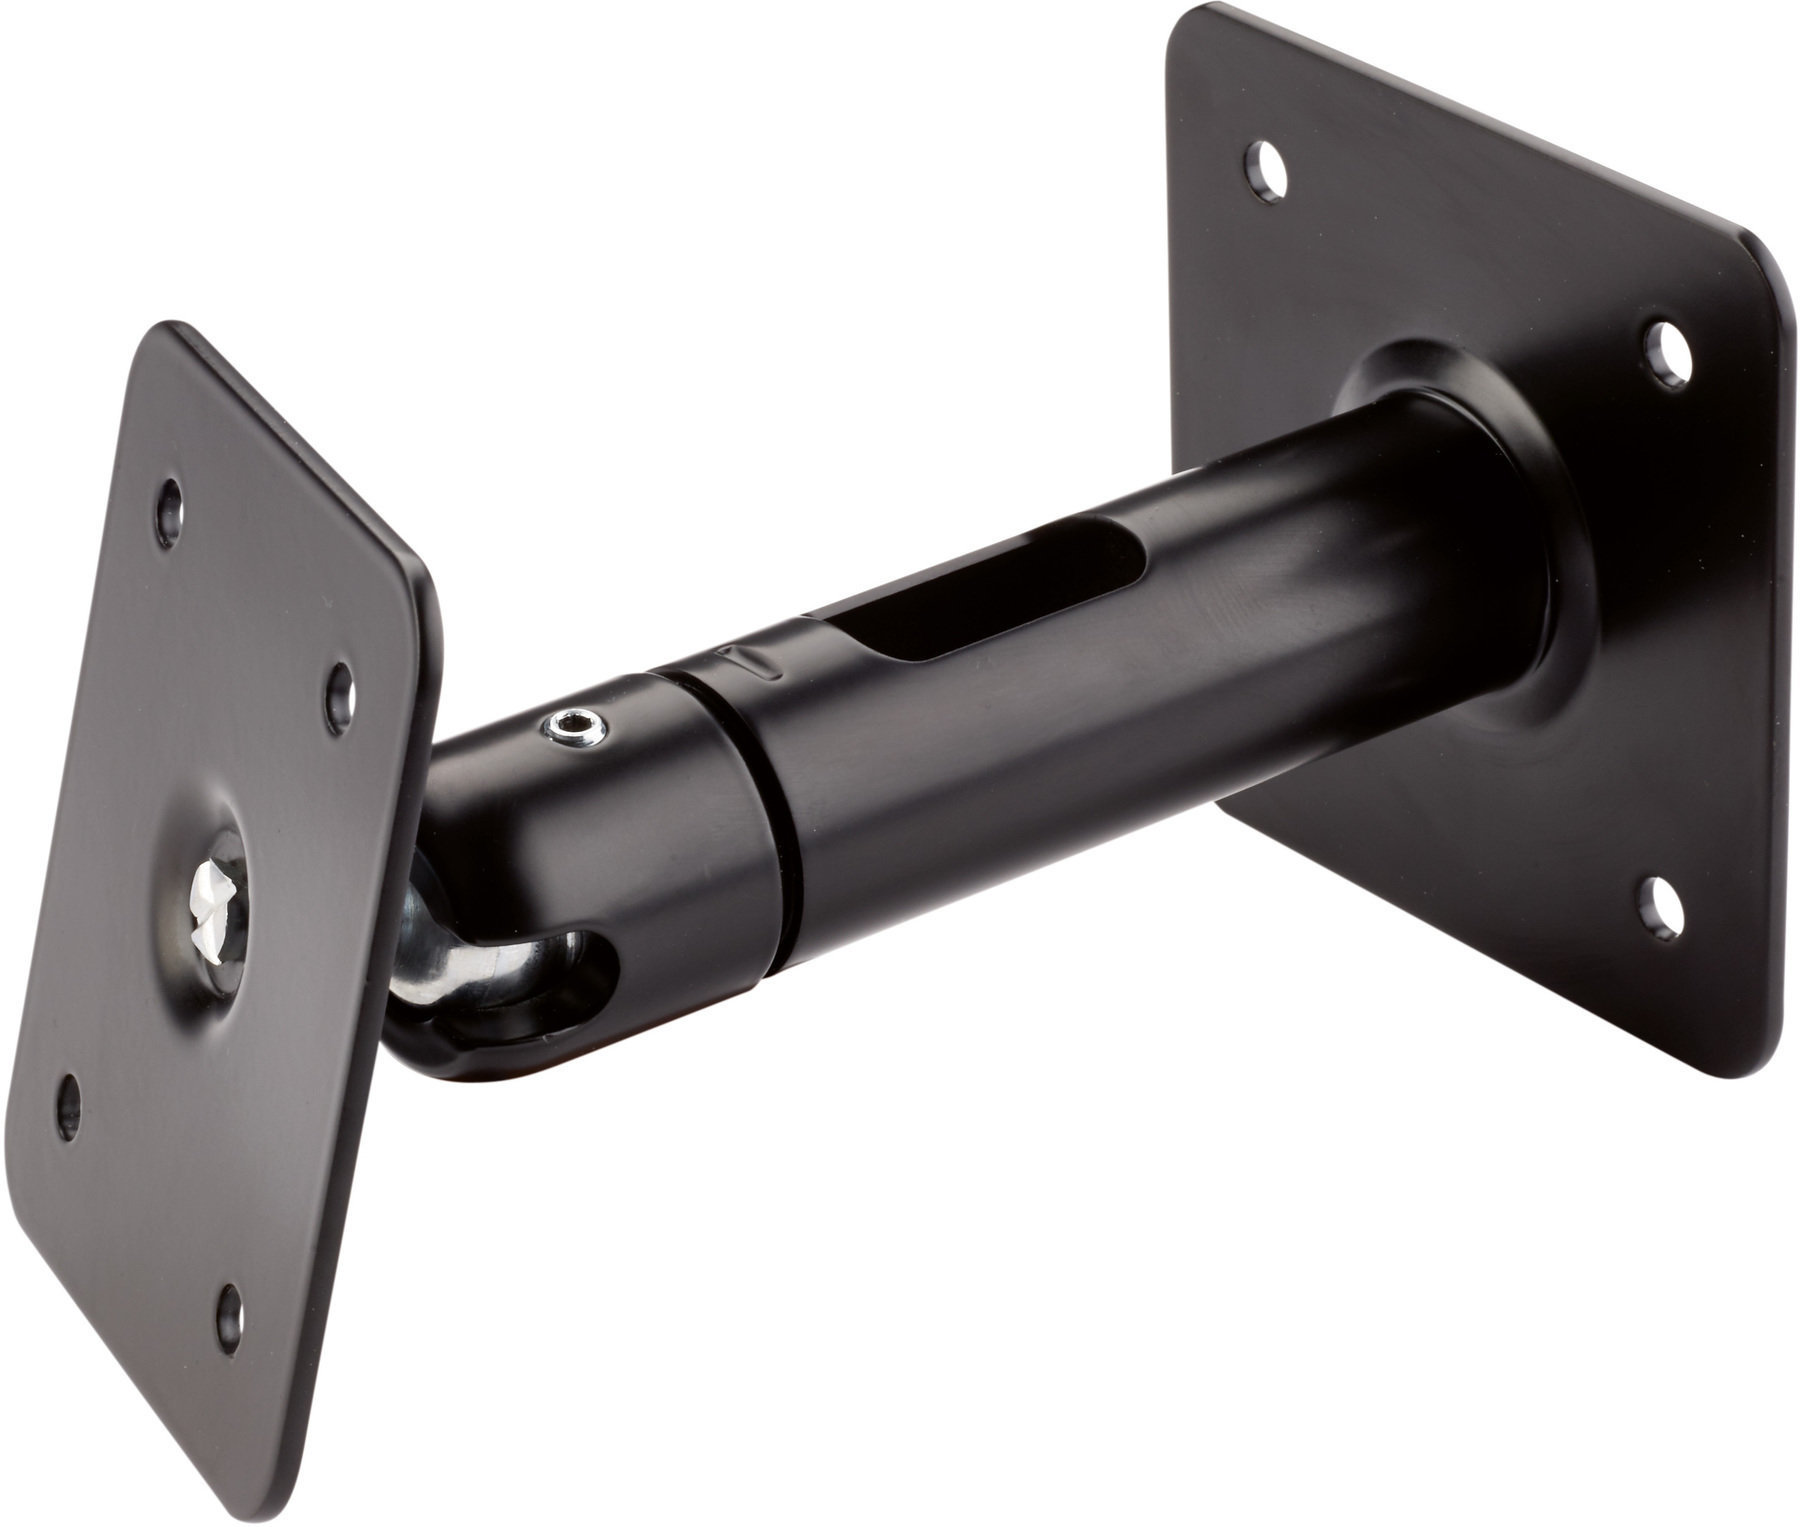 Wall mount for speakerboxes Konig & Meyer 24185 Wall mount for speakerboxes